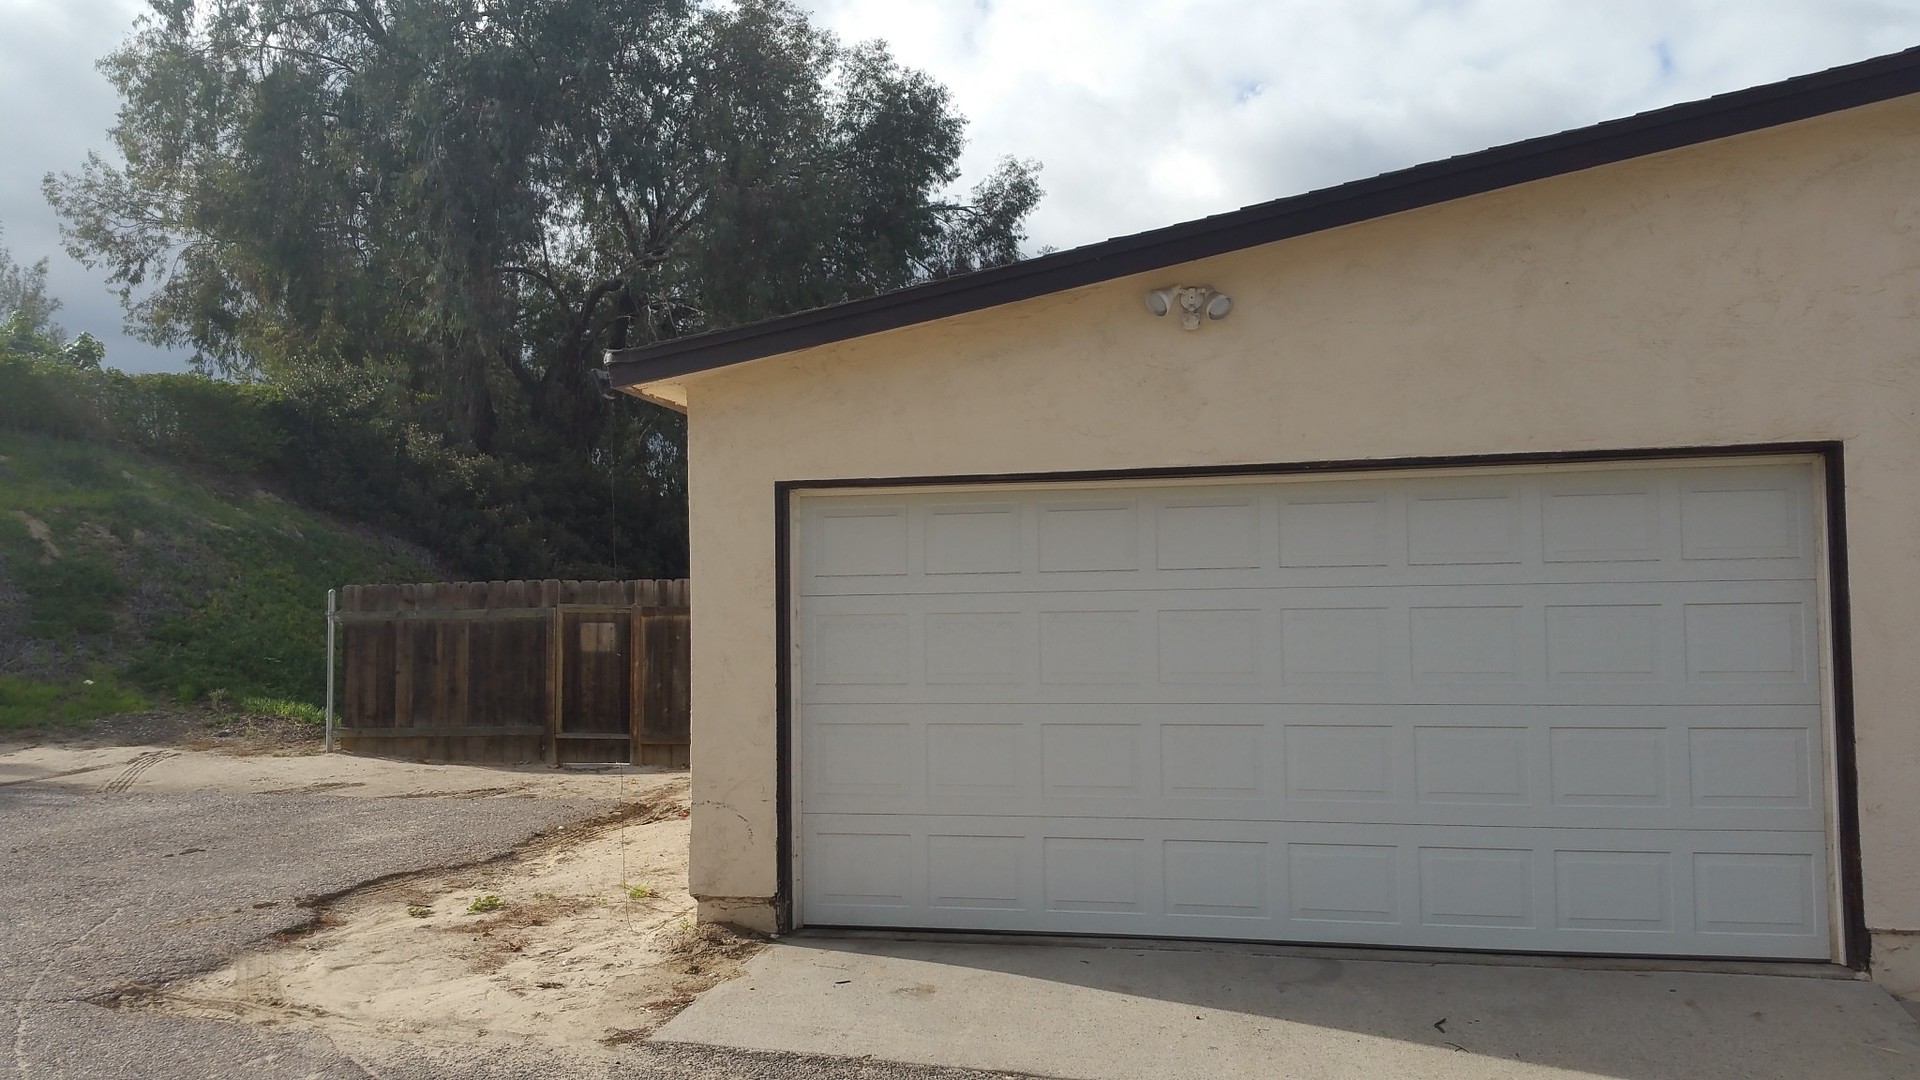 3 Bed / 2 Bath Home Backyard For Rent